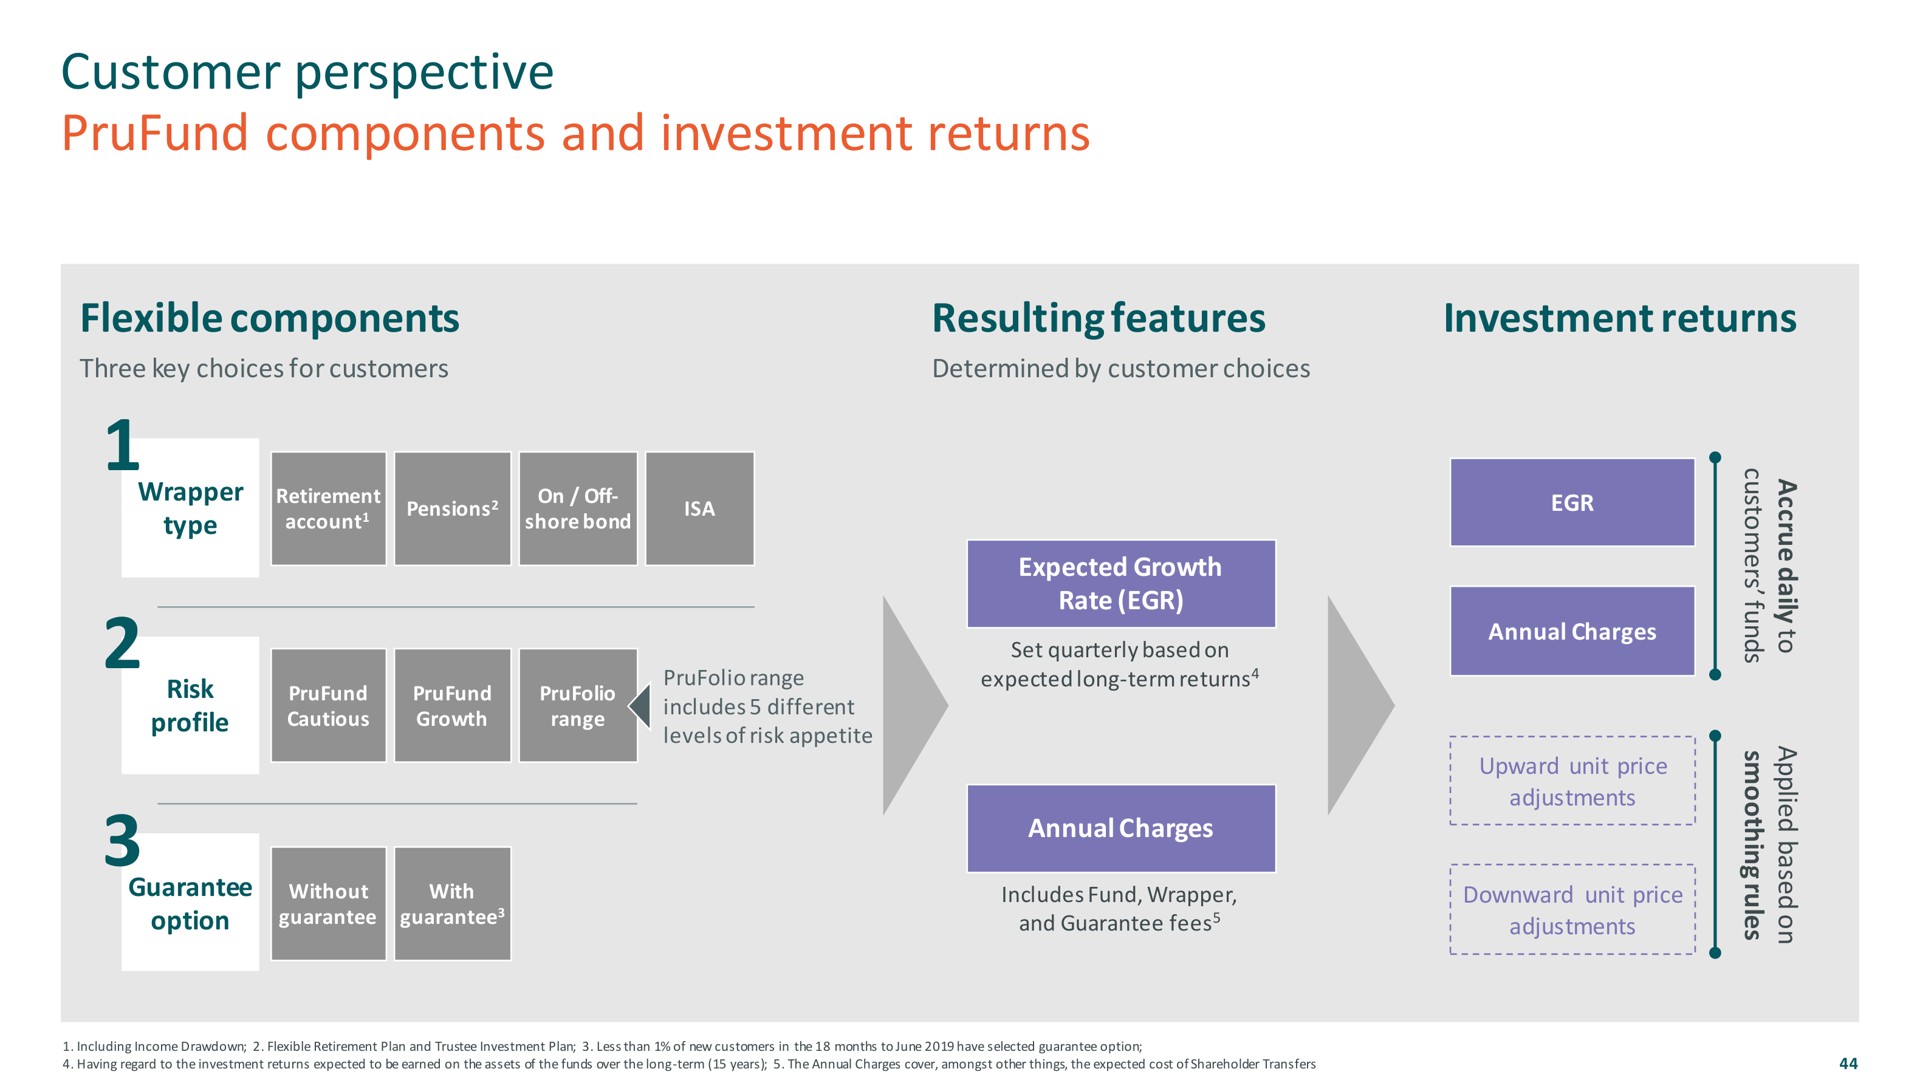 customer perspective components and investment returns | M&G